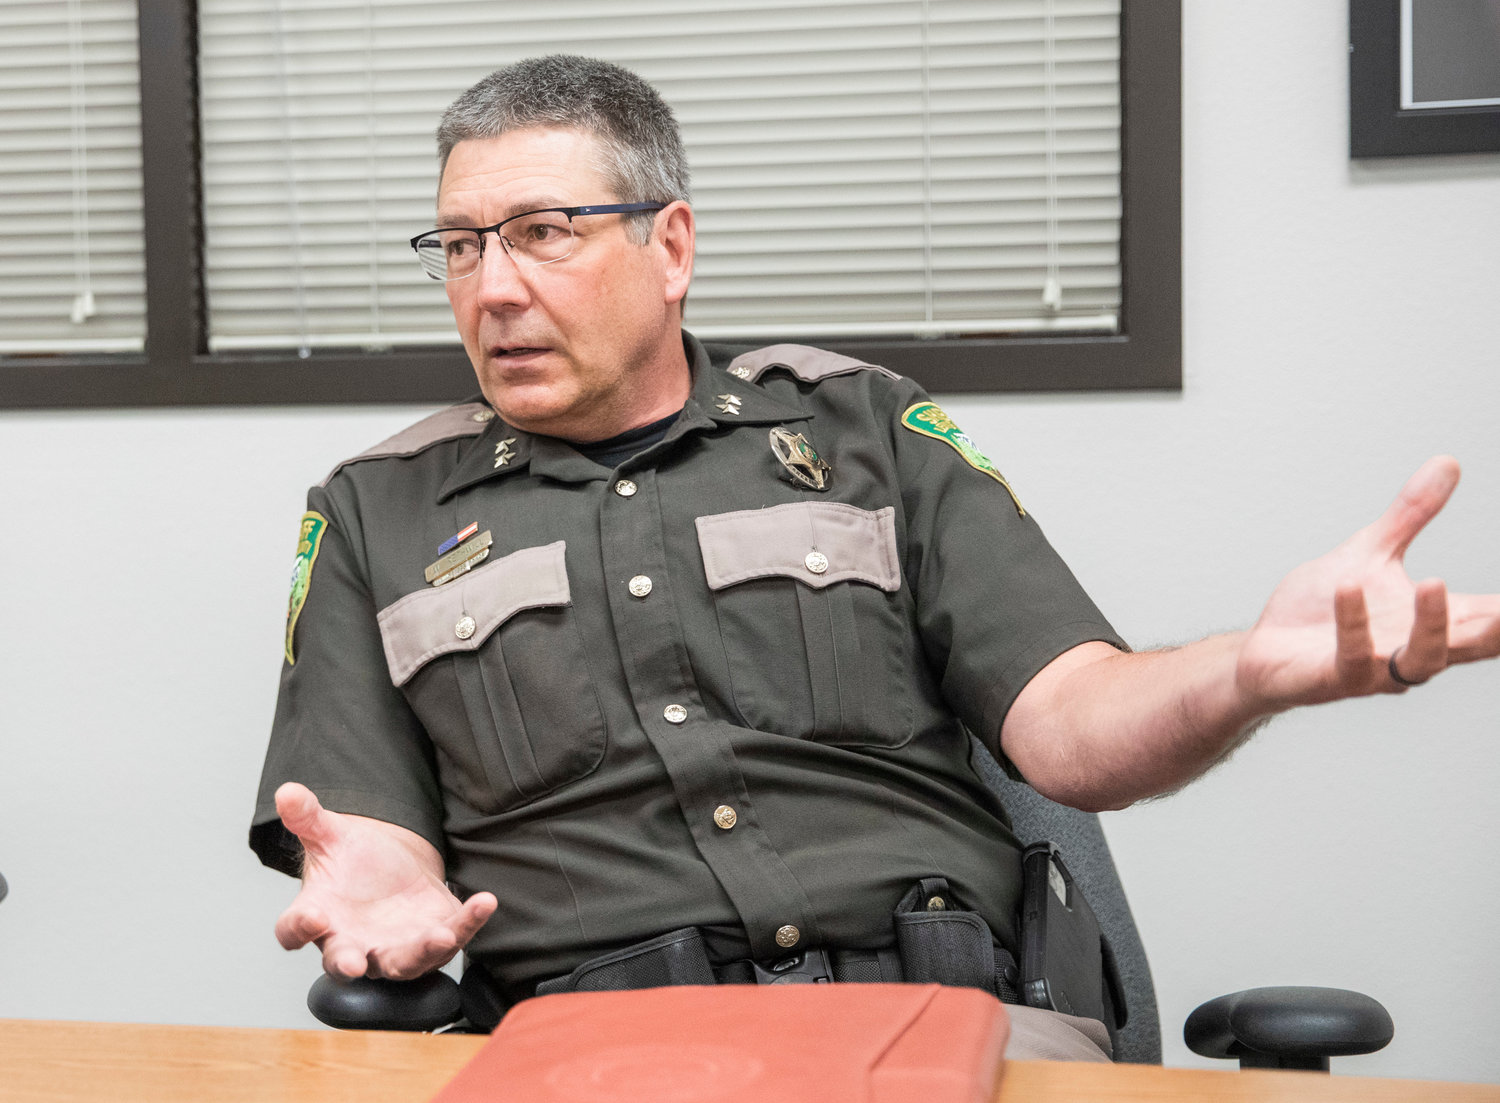 Lewis County Undersheriff Wes Rethwill talks about factors that can delay investigations during a Wednesday interview in Chehalis.